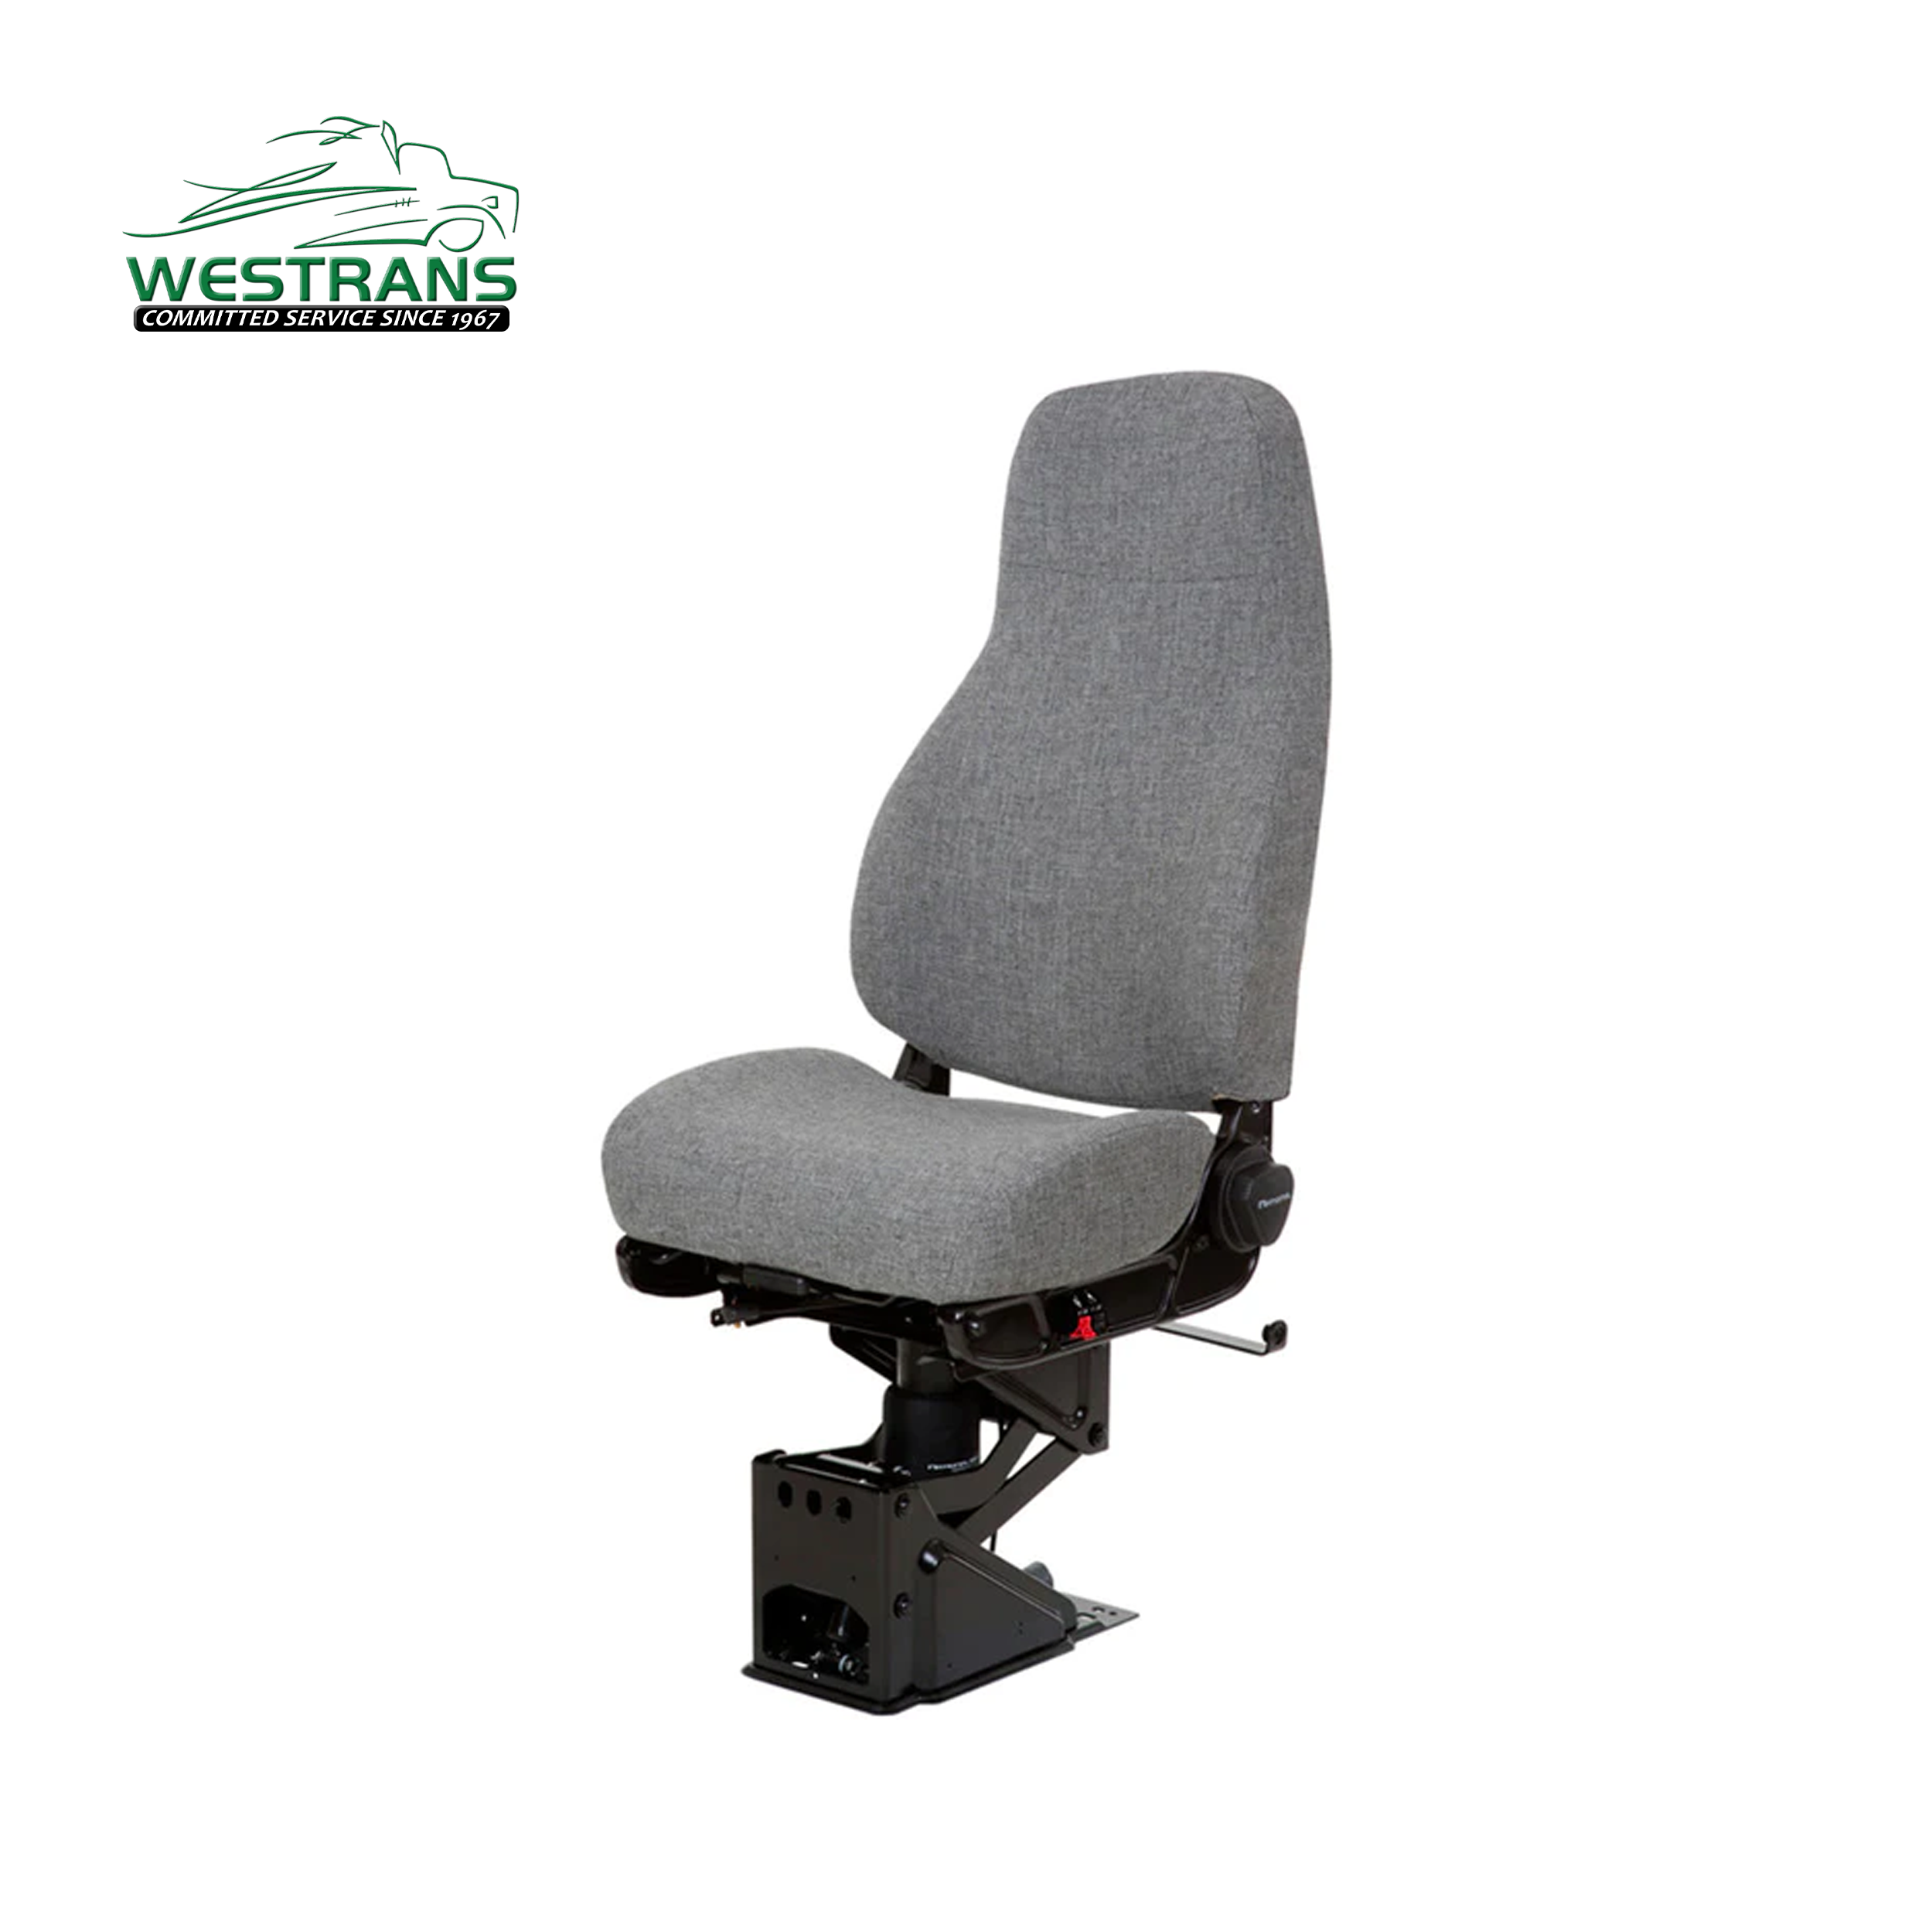 NEW ARRIVALS 51110.031 Ensign Seat-High